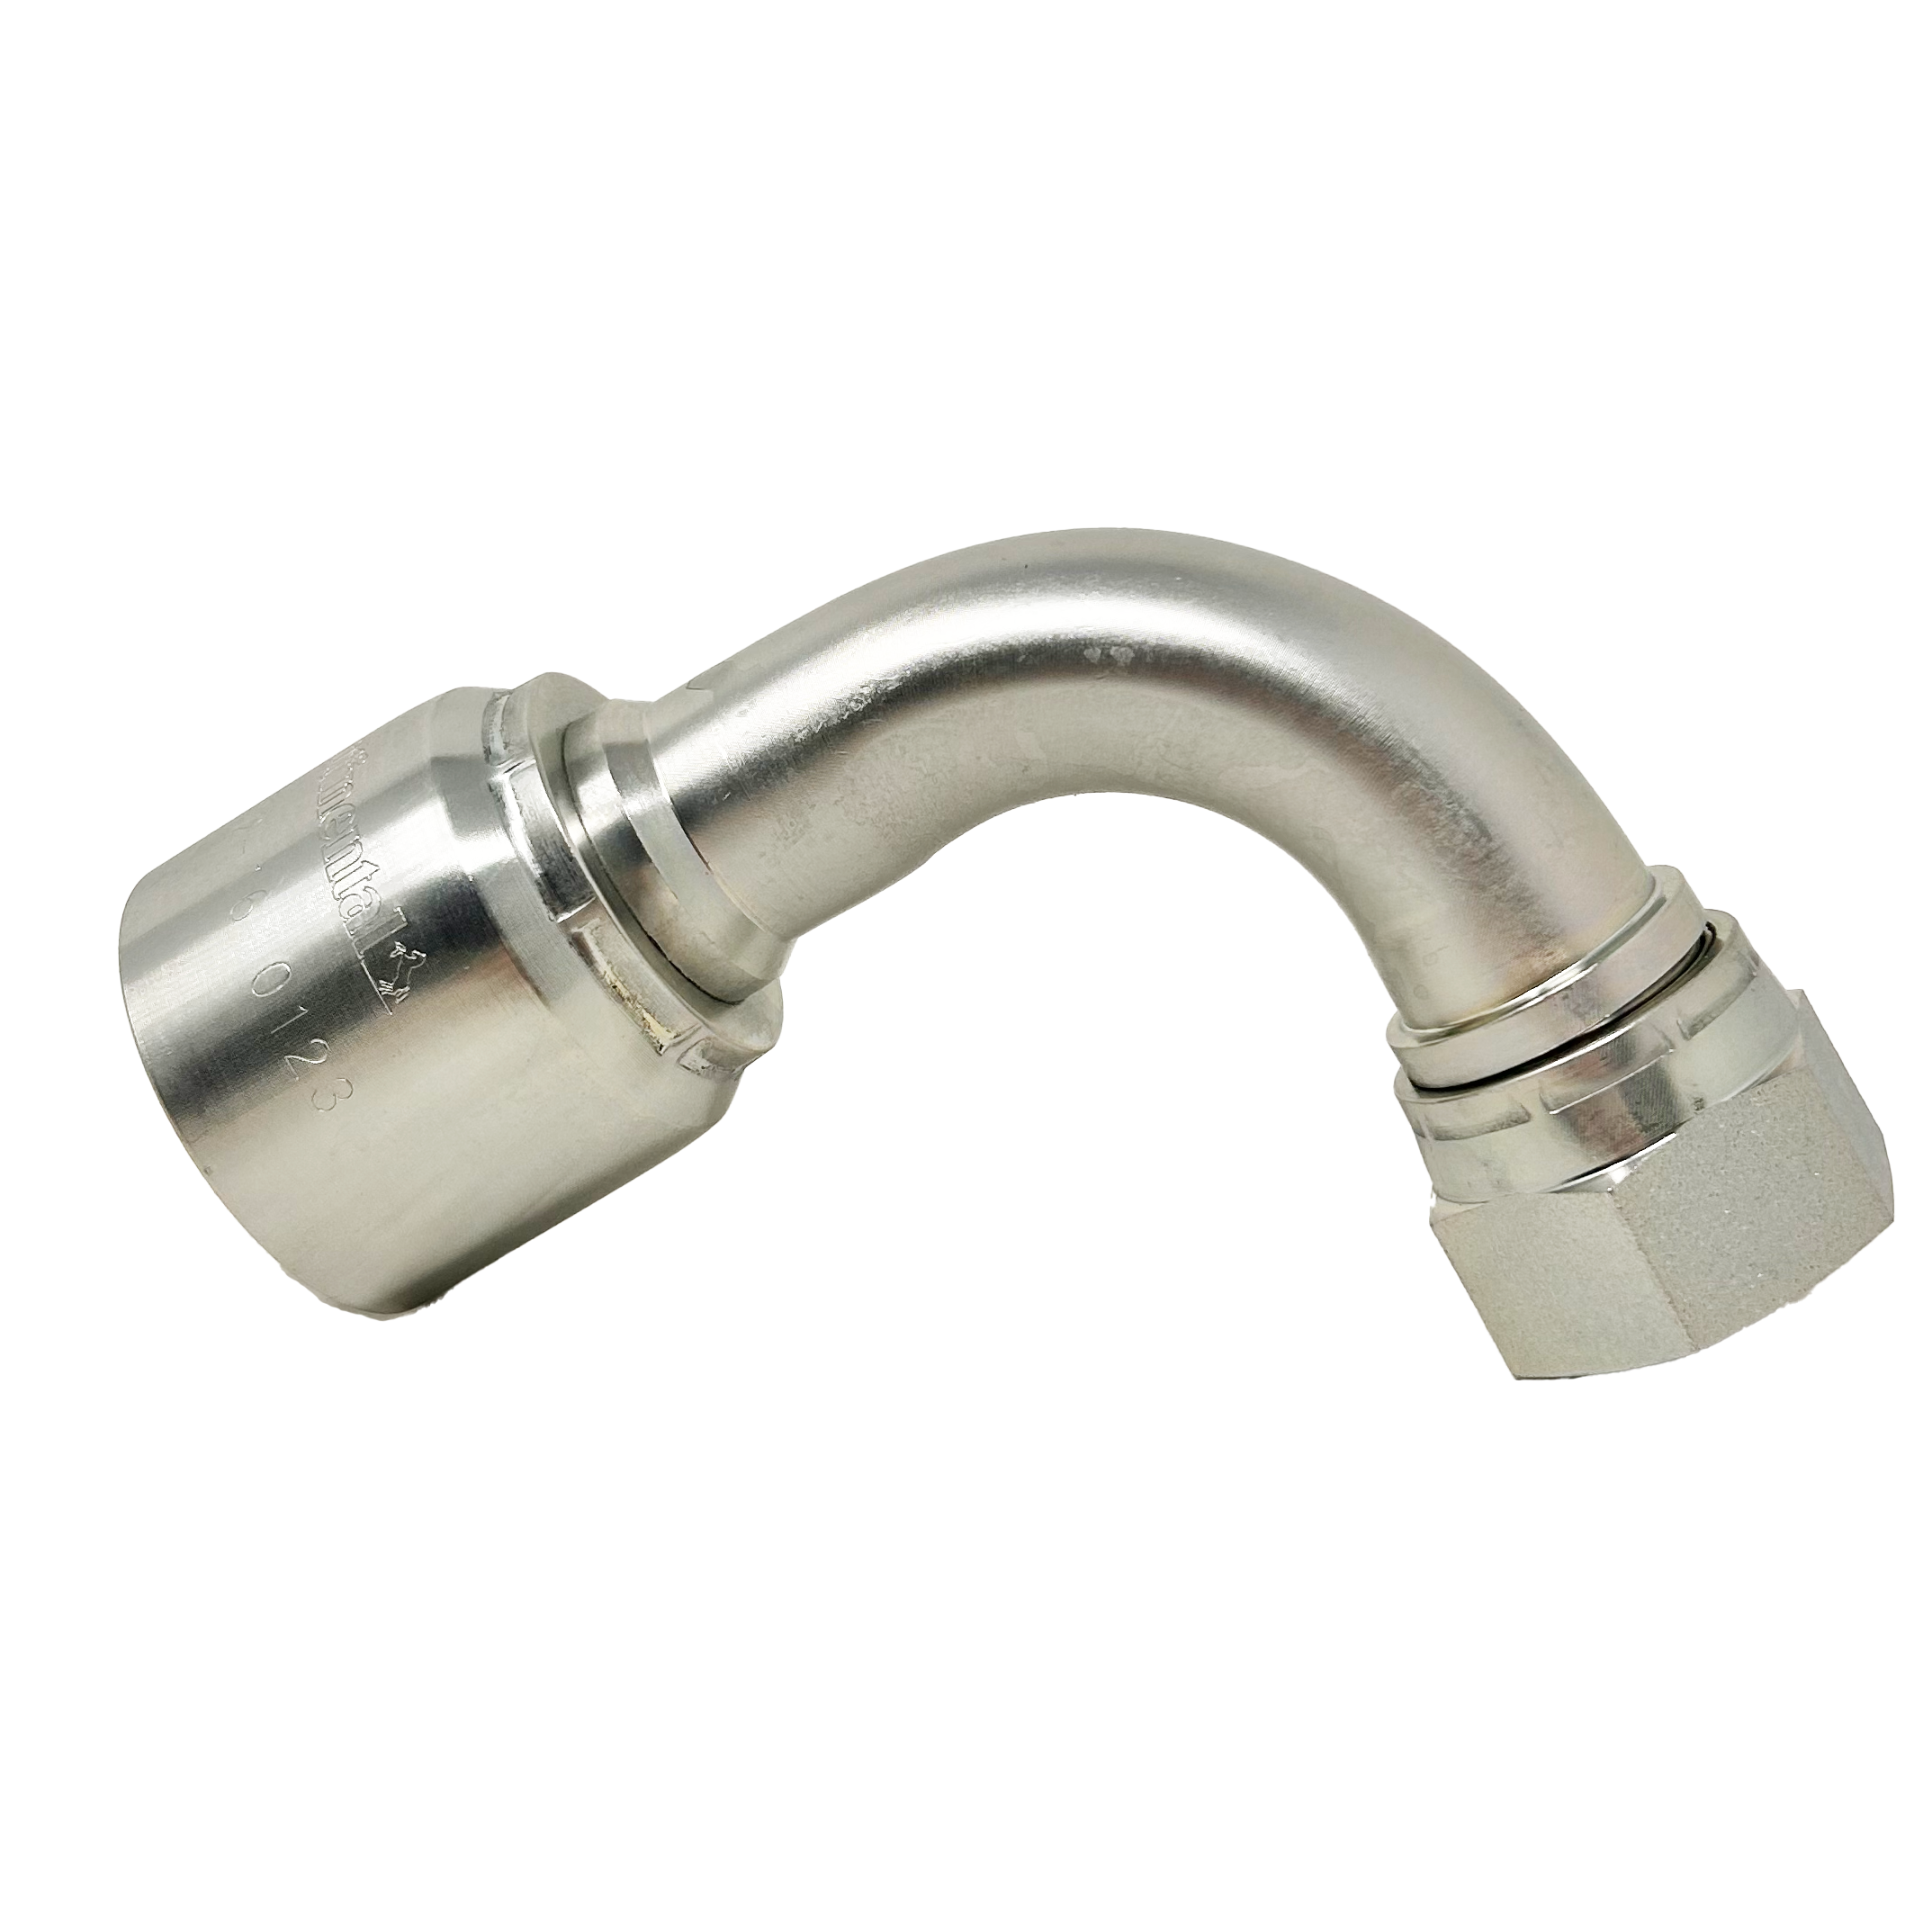 B2-JCFX90-0404: Continental Hose Fitting, 0.25 (1/4") Hose ID x 7/16-20 Female JIC, 90-Degree Swivel Connection